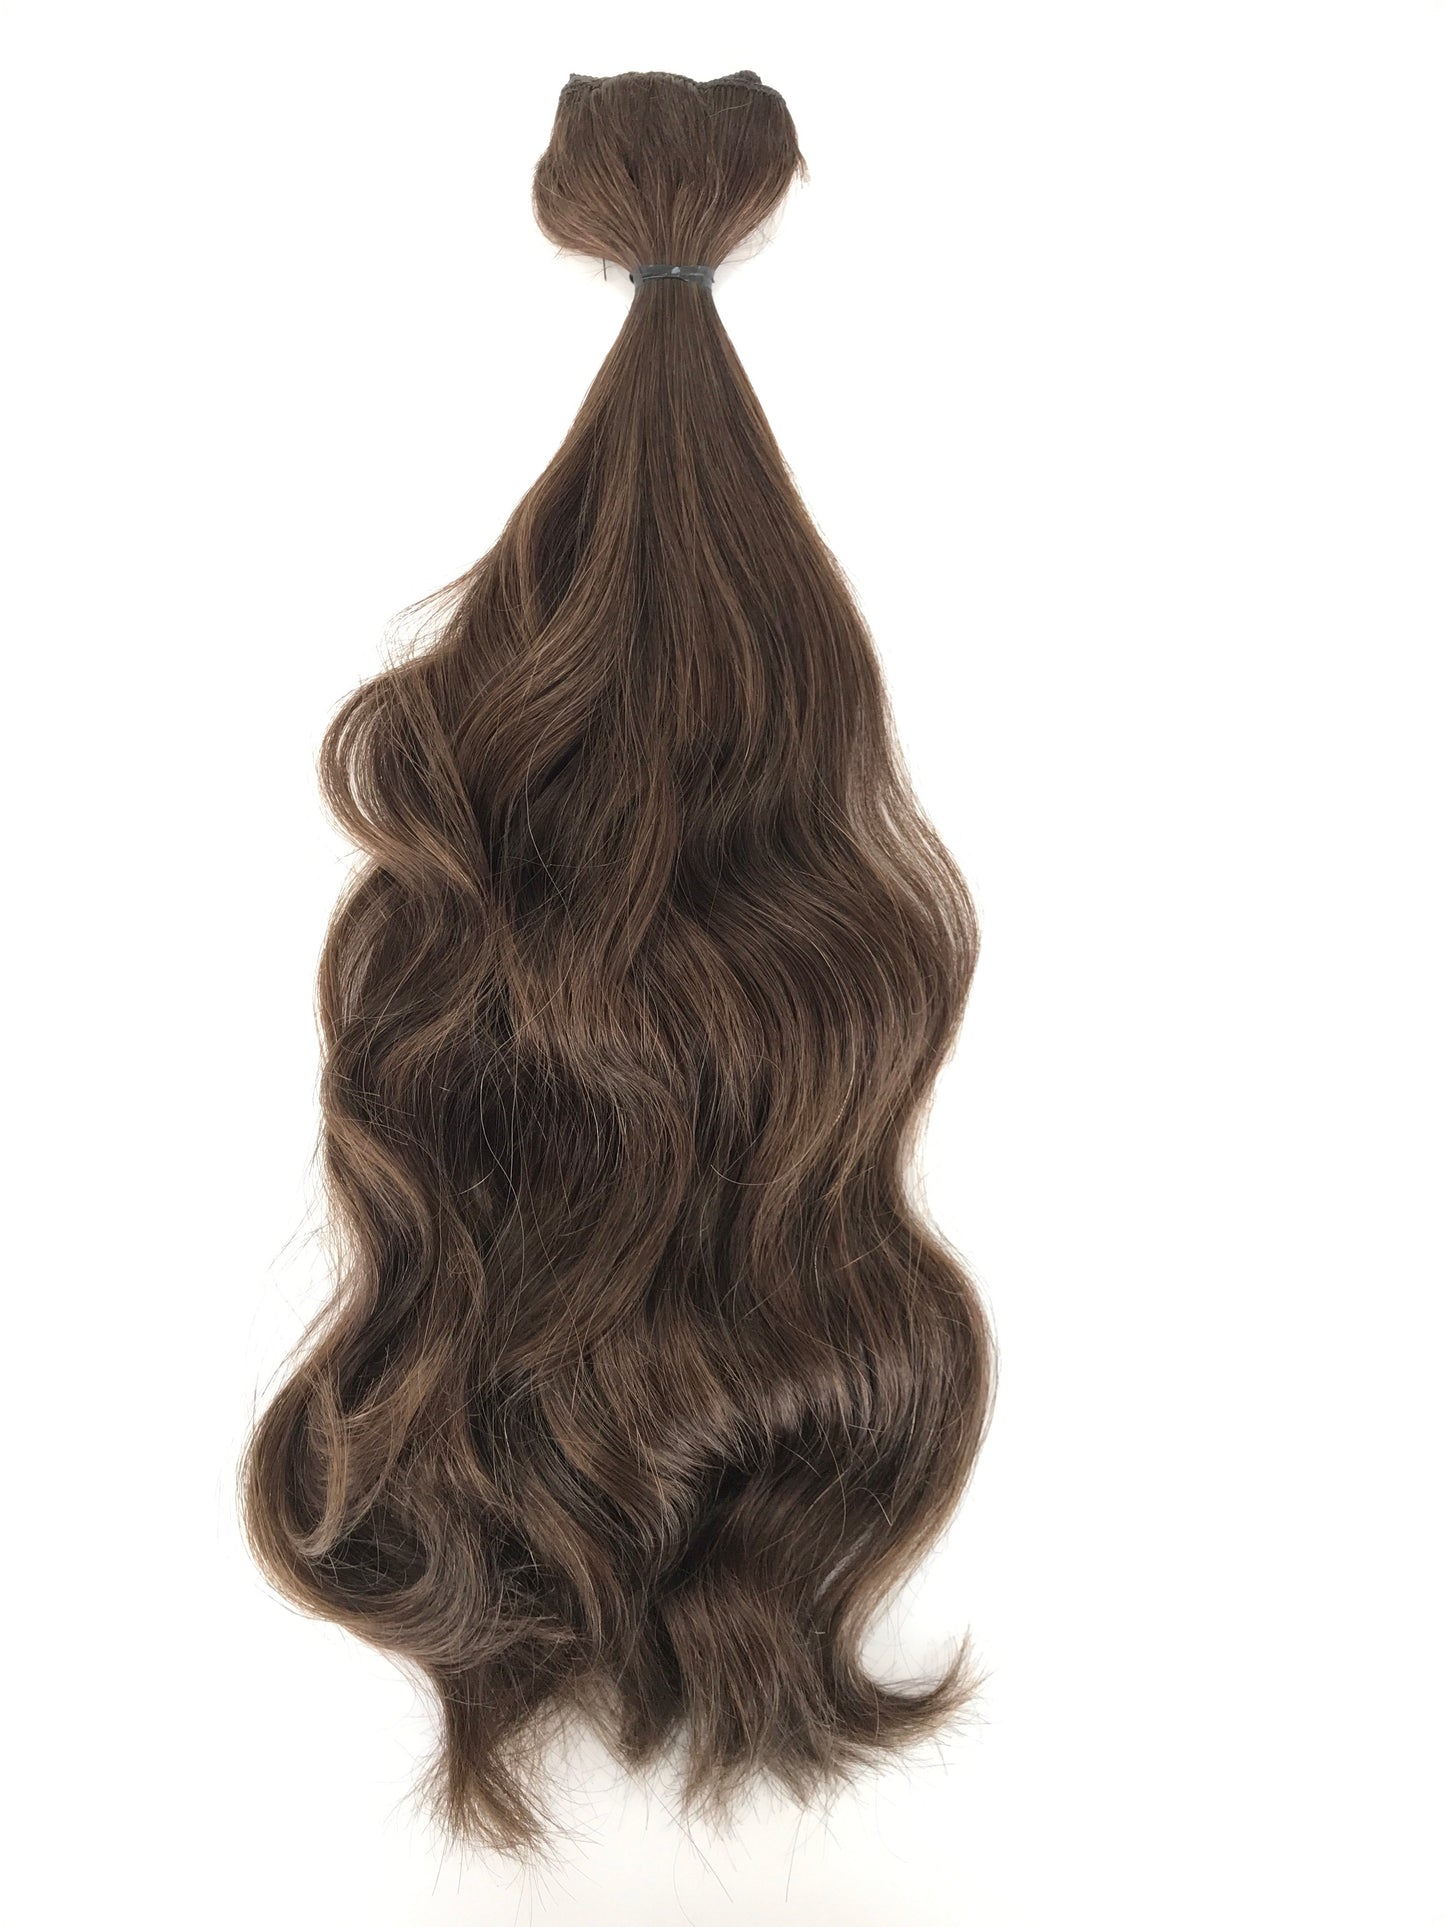 NEW! Brazilian Remy Human Hair, Clip In Extensions, 18", Colour 3, Brown, 100g-Virgin Hair & Beauty, The Best Hair Extensions, Real Virgin Human Hair.